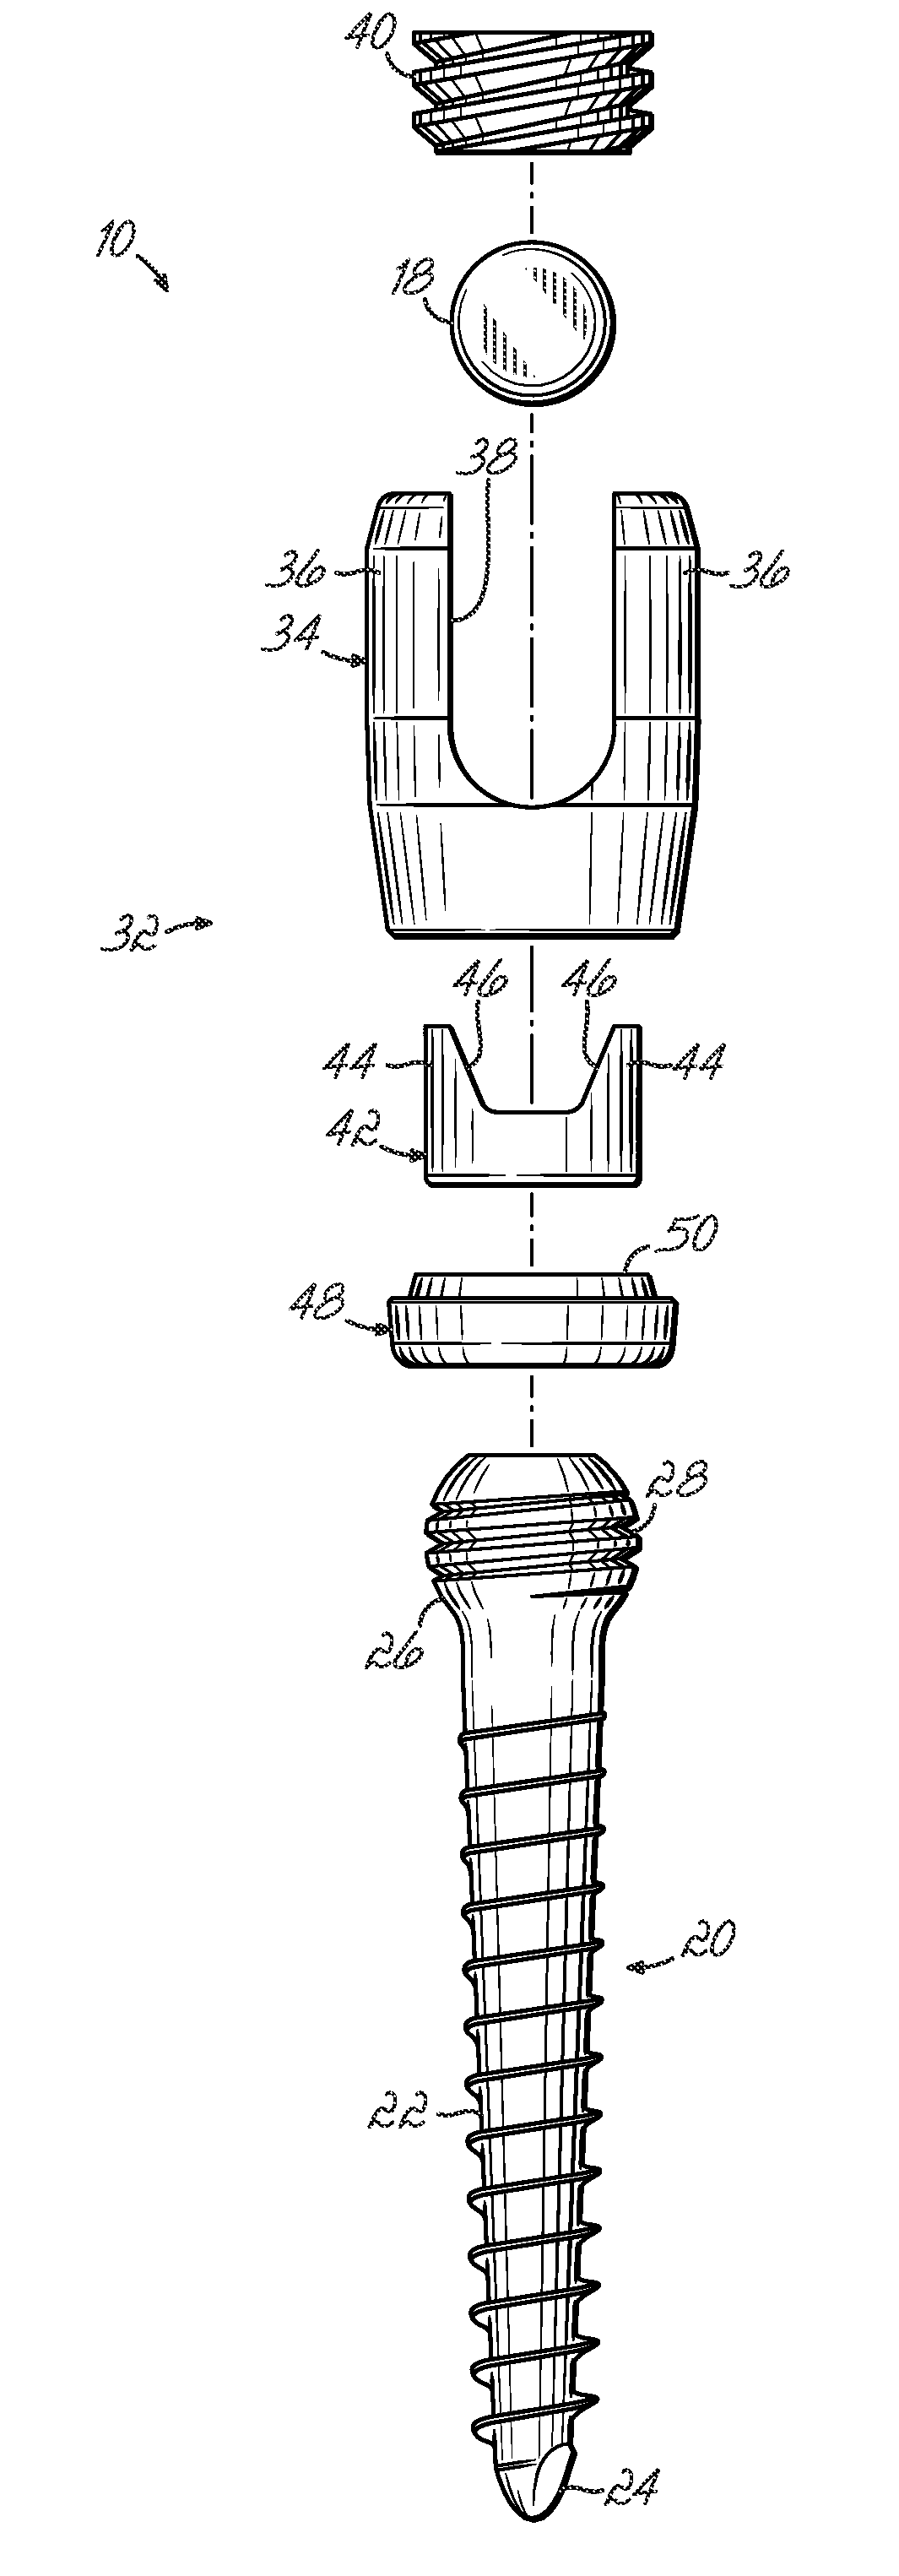 Removable polyaxial housing for a pedicle screw